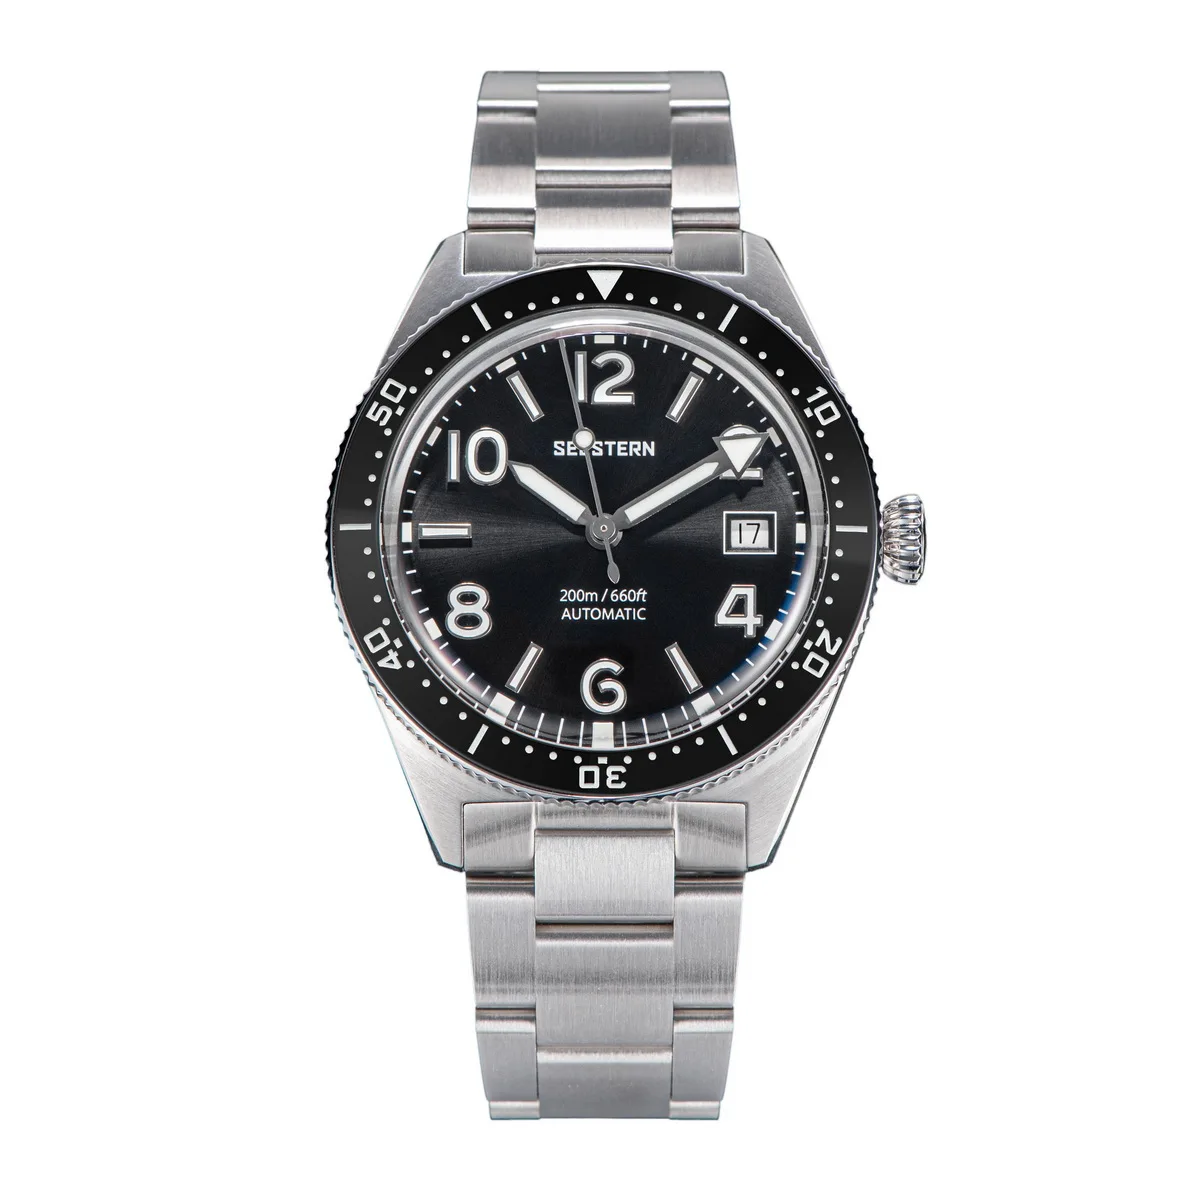 Diving Watch of Men Automatic Mechanical Wristwatches Seagul ST2130 Move... - £455.89 GBP